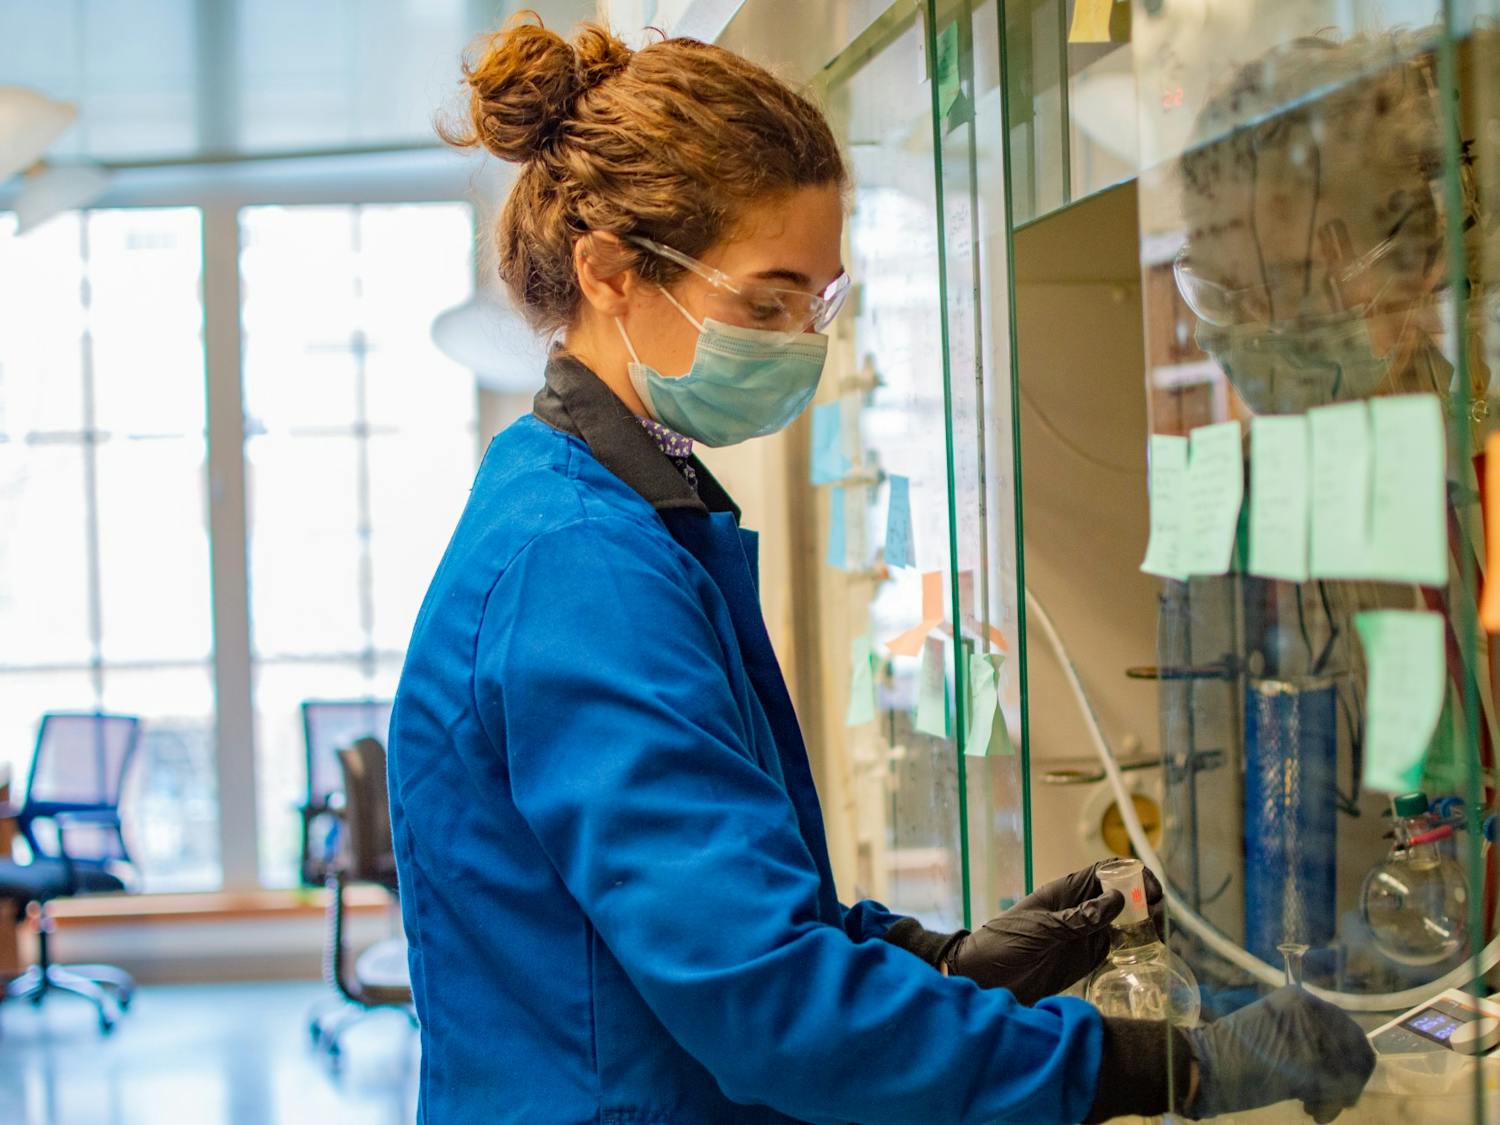 Eliza Neidhart, a second year student in the chemistry graduate program, cleans her tools in the Leibfarth lab where she does polymer research on Feb. 22, 2022.